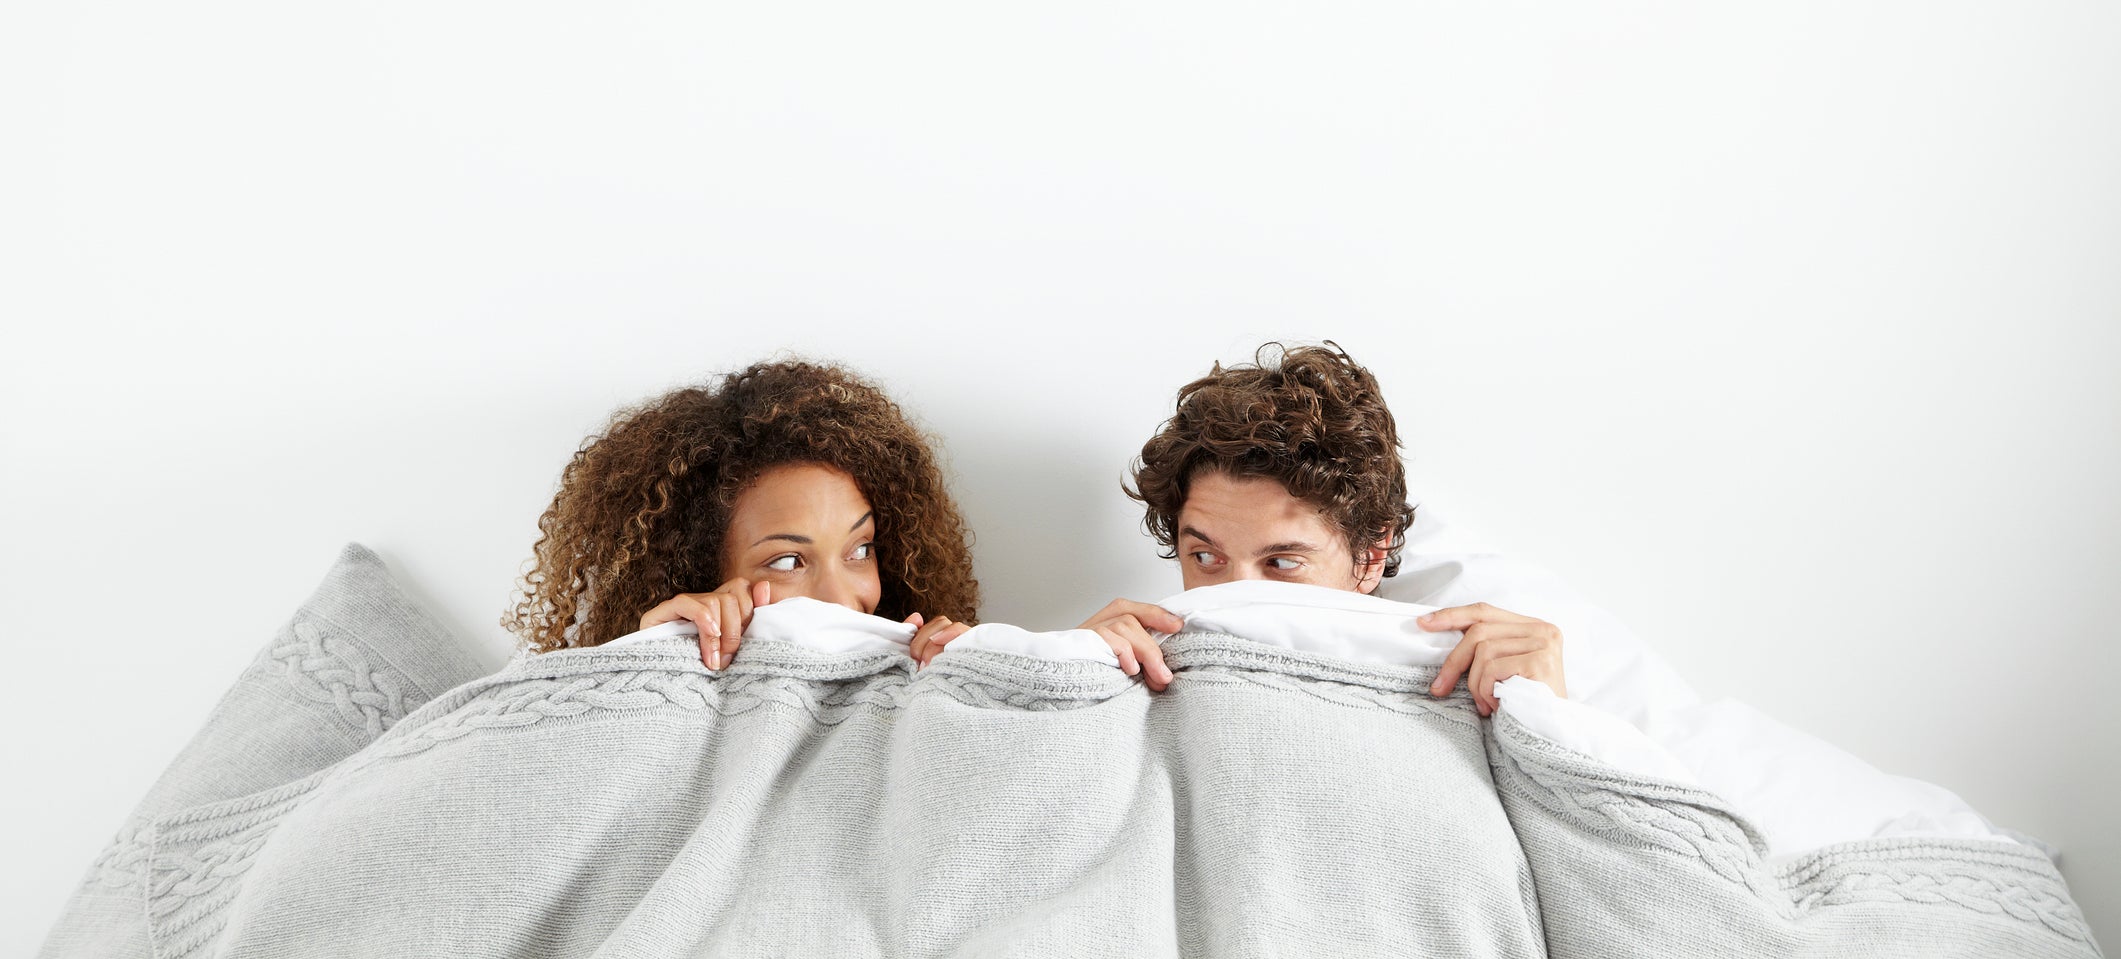 Two people peeking over a blanket with playful expressions